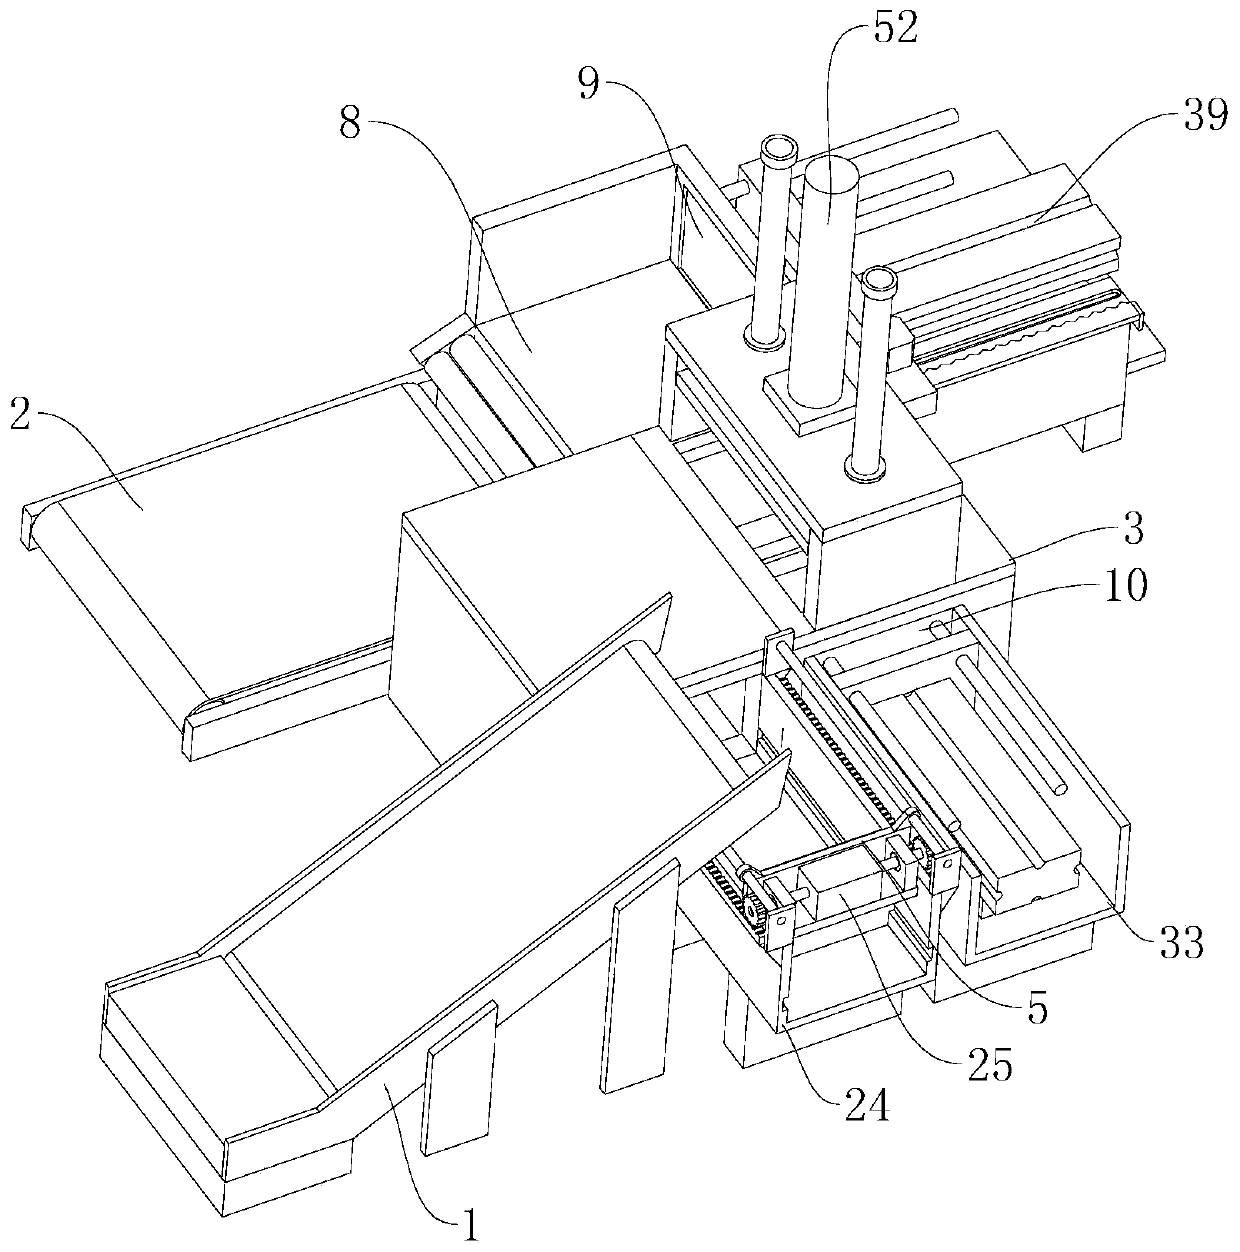 Briquetting device for scrap metal recycling